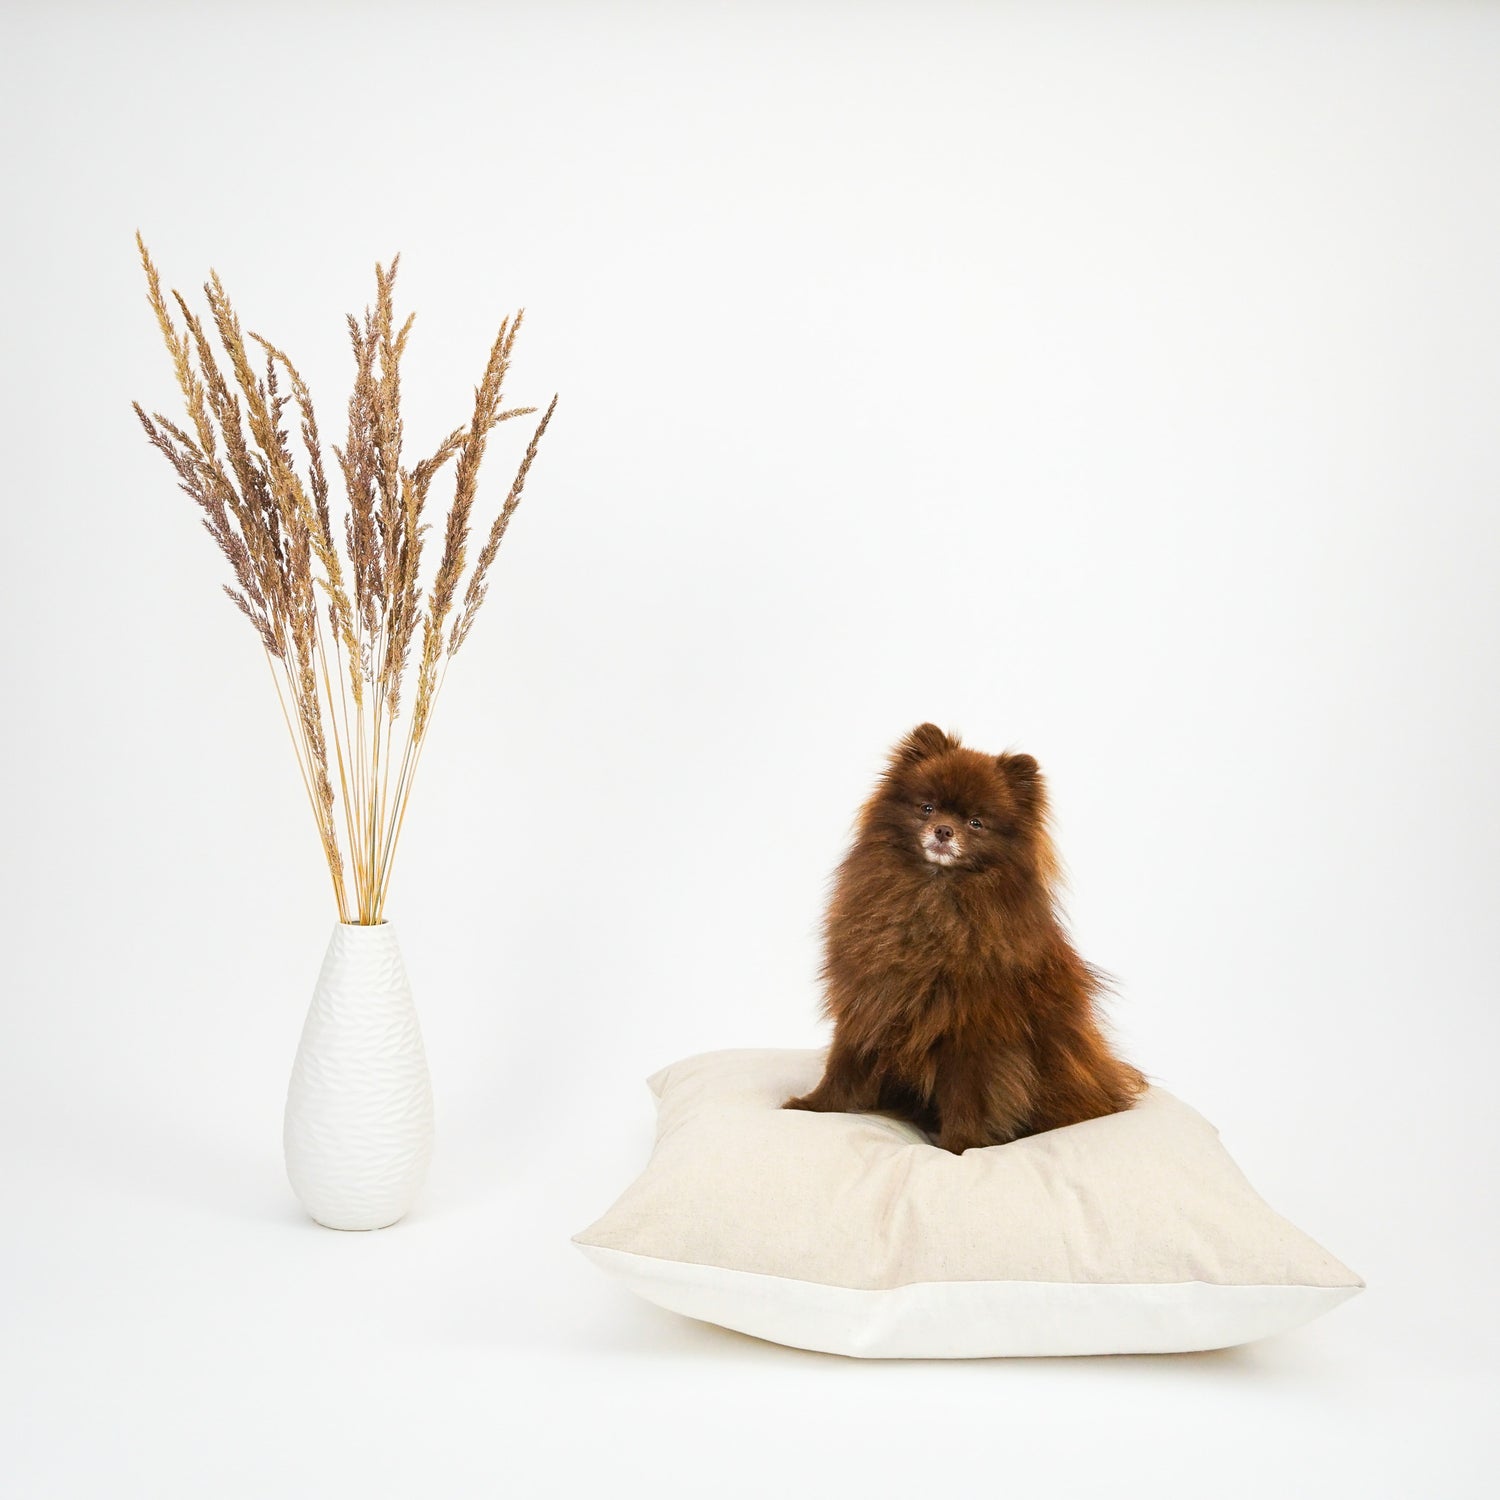 The Everyday Dog Bed is certified sustainable by Global Measure